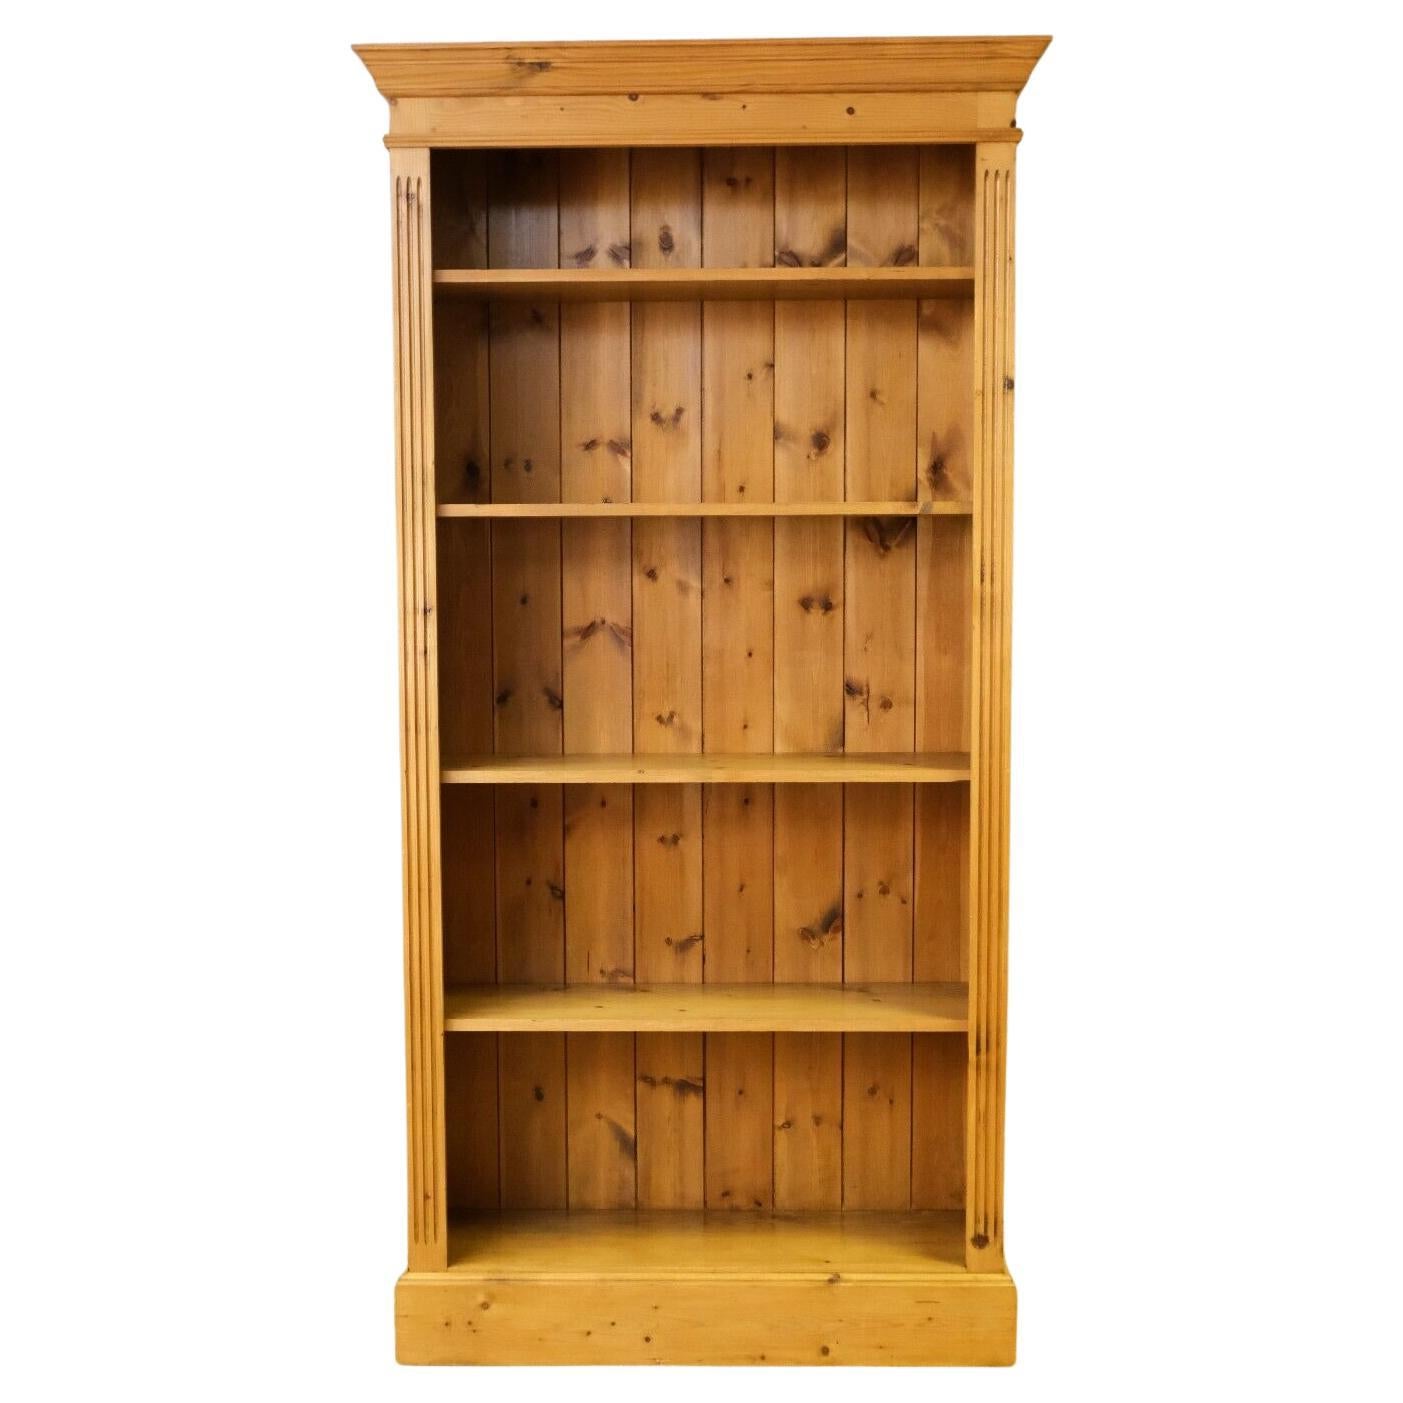 We are delighted to offer for sale this classic Pine open bookcase with adjustable shelves and a plinth base.

This stunning, well made bookcase is raised on a plinth base and fluted pilasters and a decorative top cornice. The adjustable shelves can